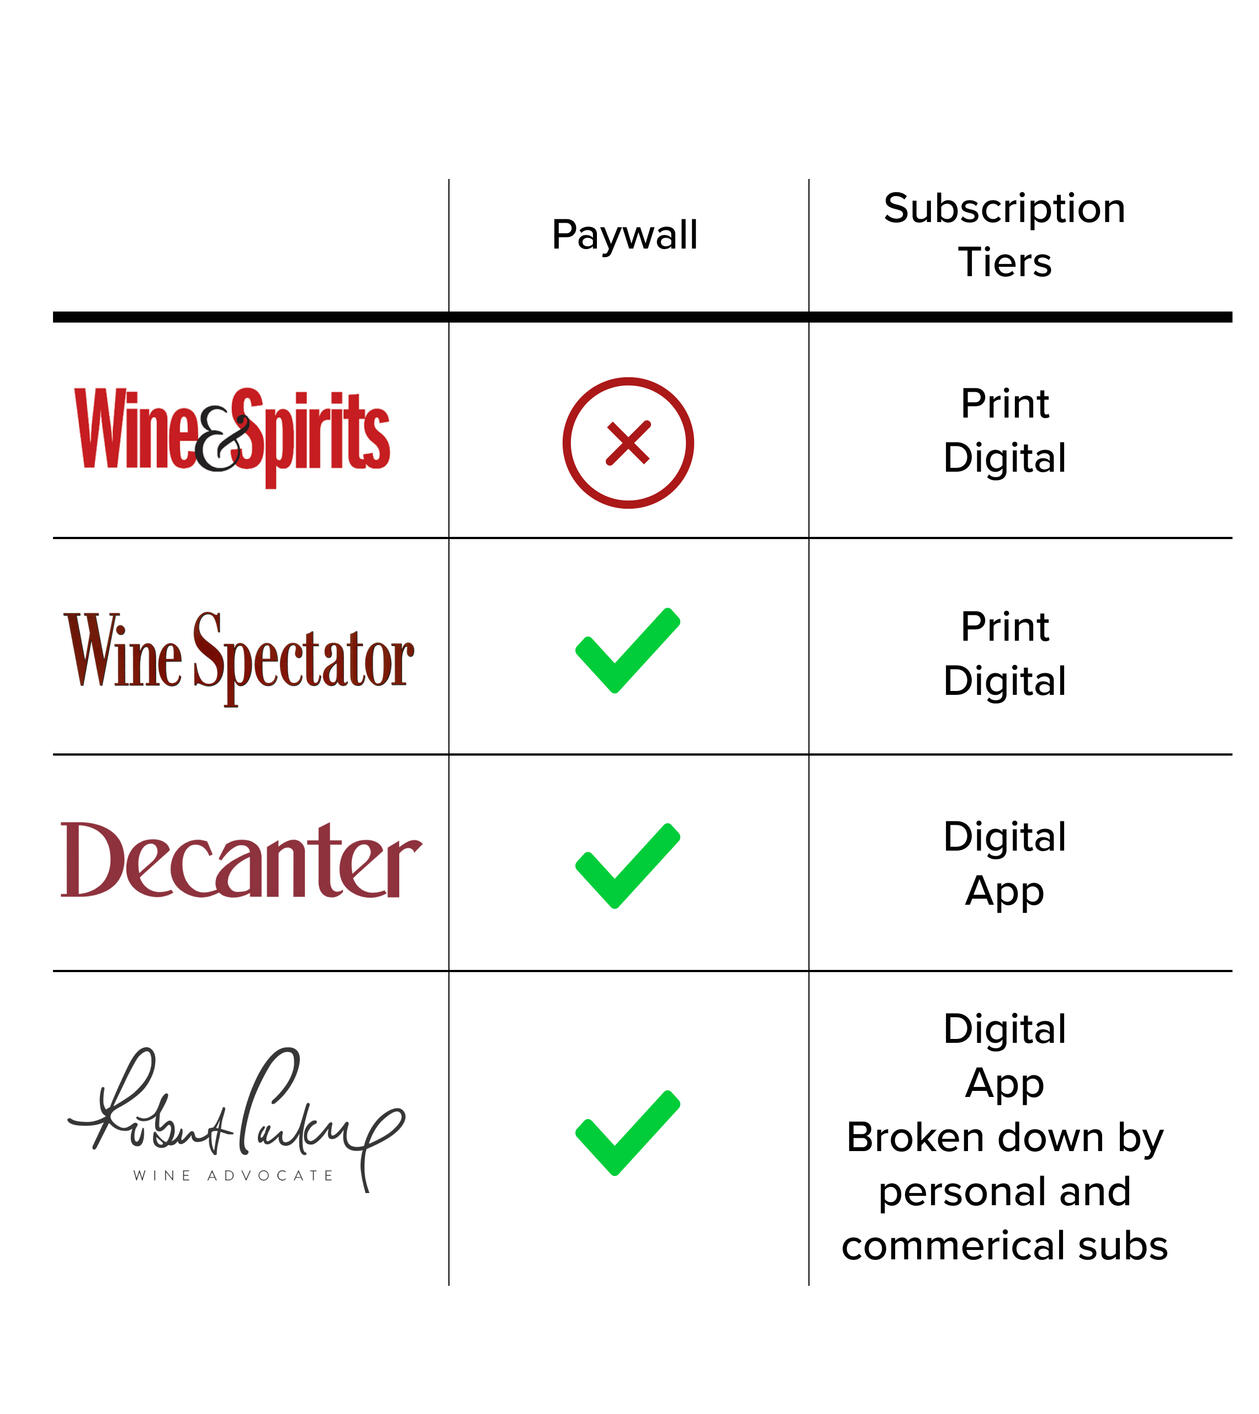 Comparison of Wine & Spirits' site features to their current competitors.